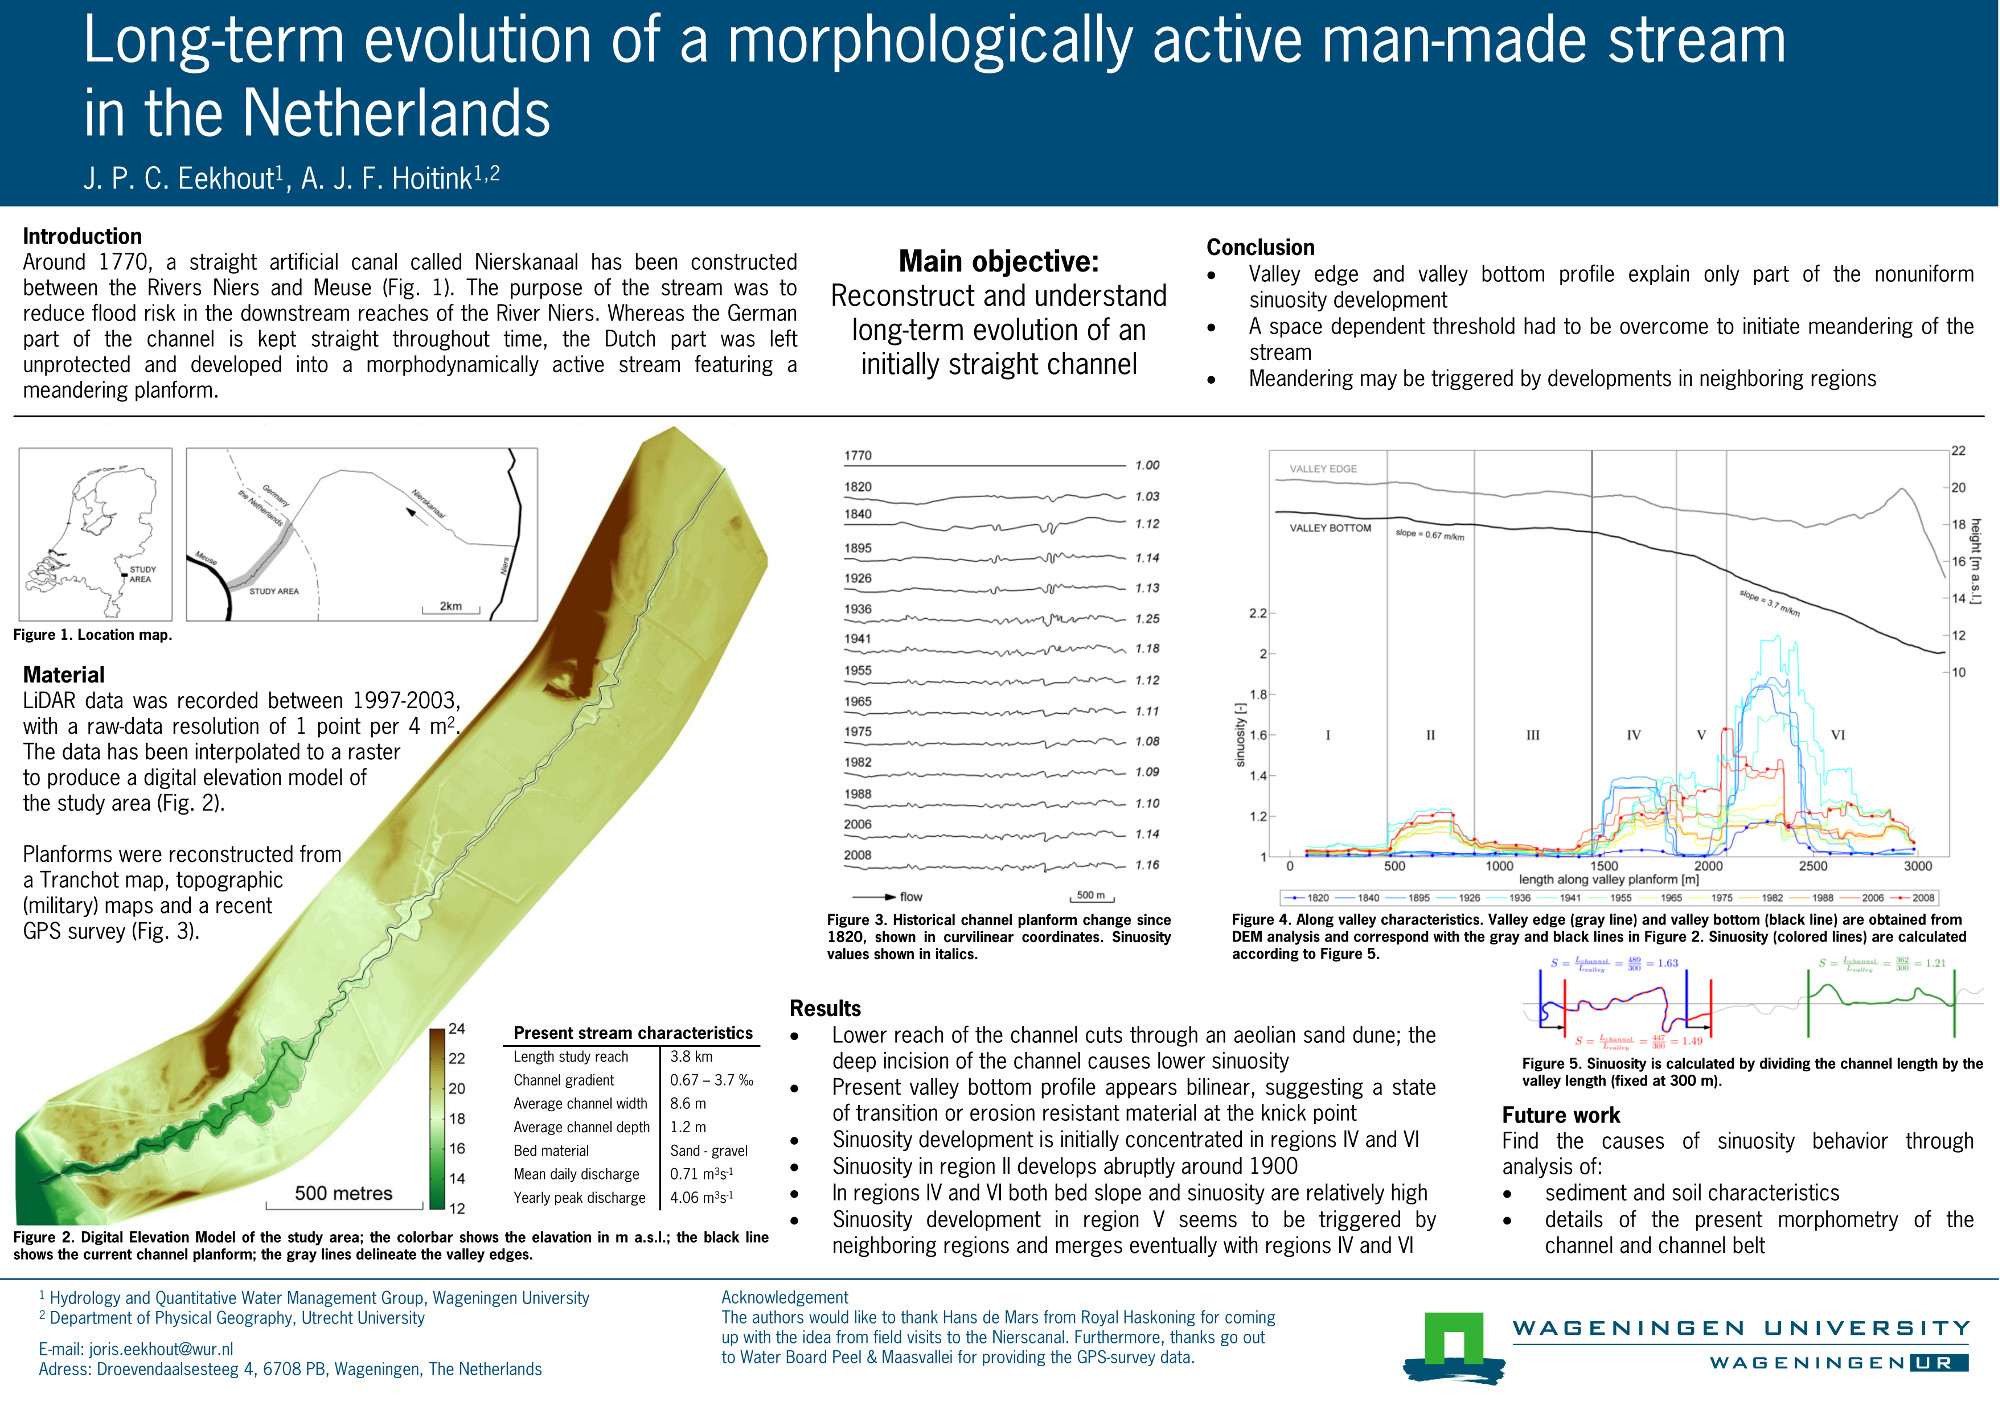 Long-term morphological evolution of a morphologically active man-made stream in the Netherlands